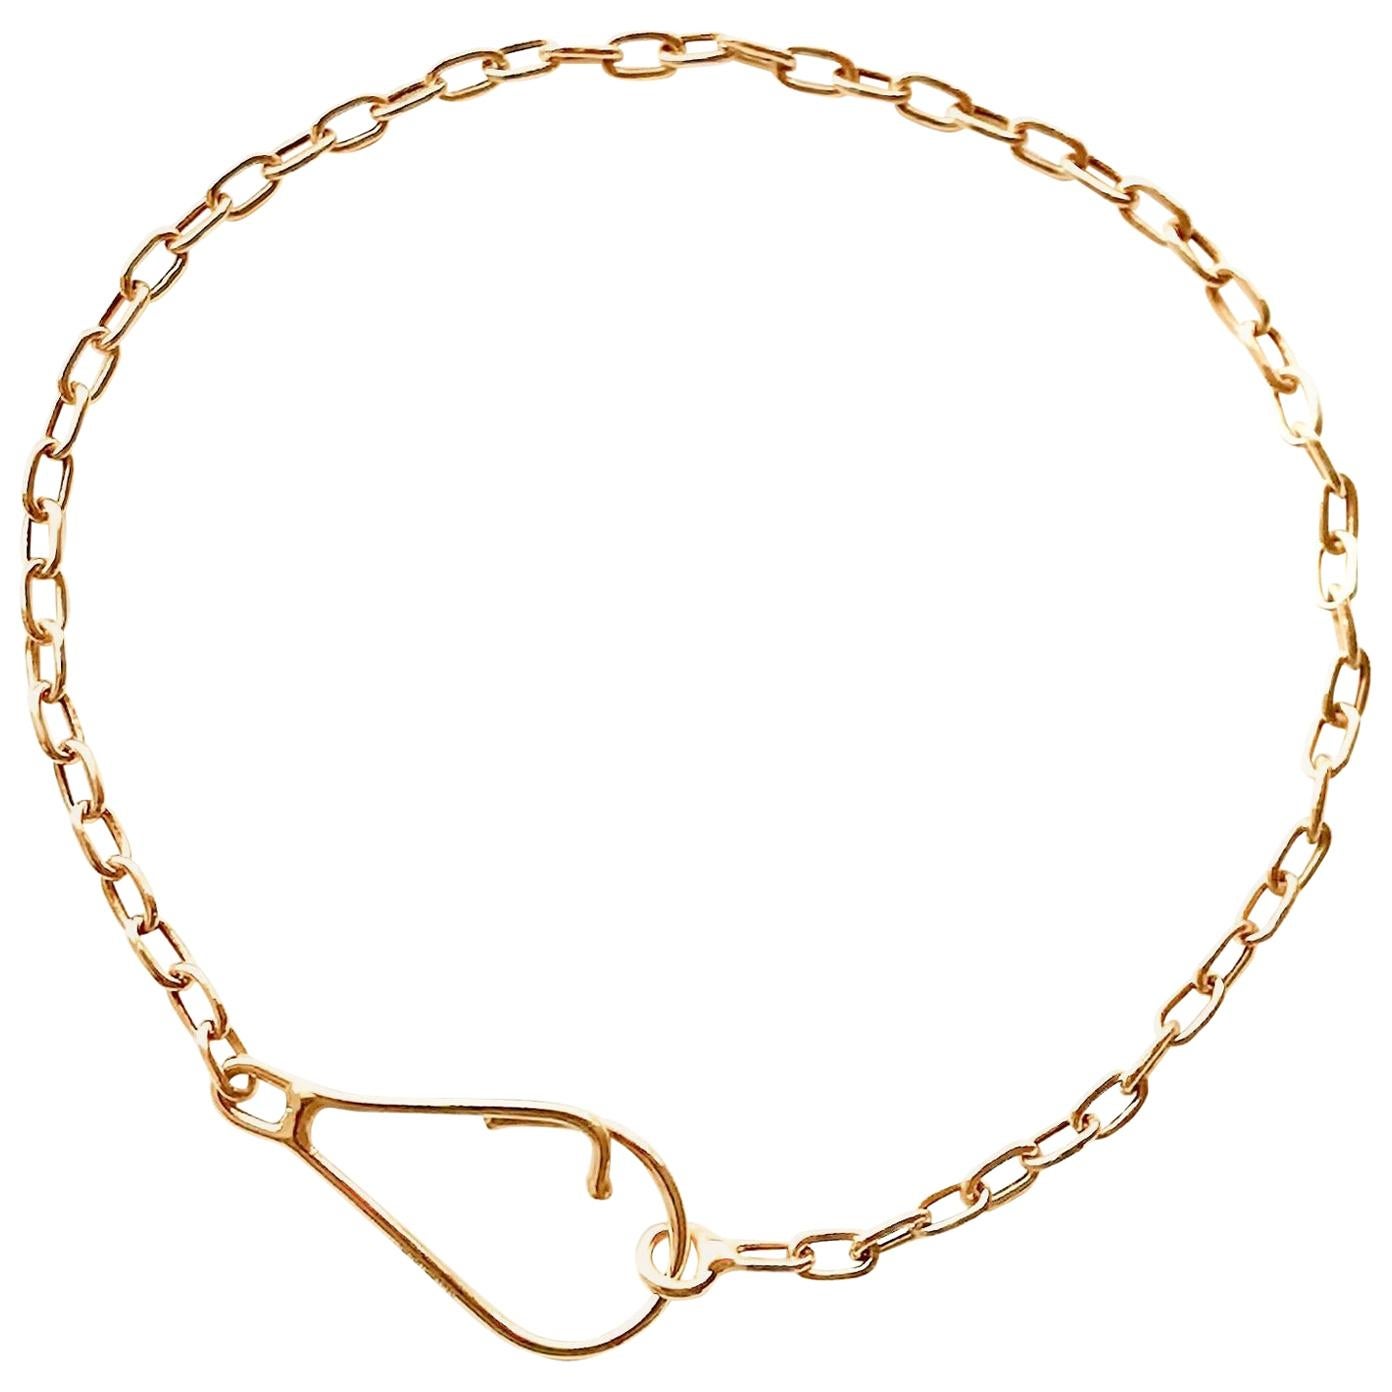 18 Karat Solid Yellow Gold Link Chain Bracelet with a Handmade Clasp For Sale